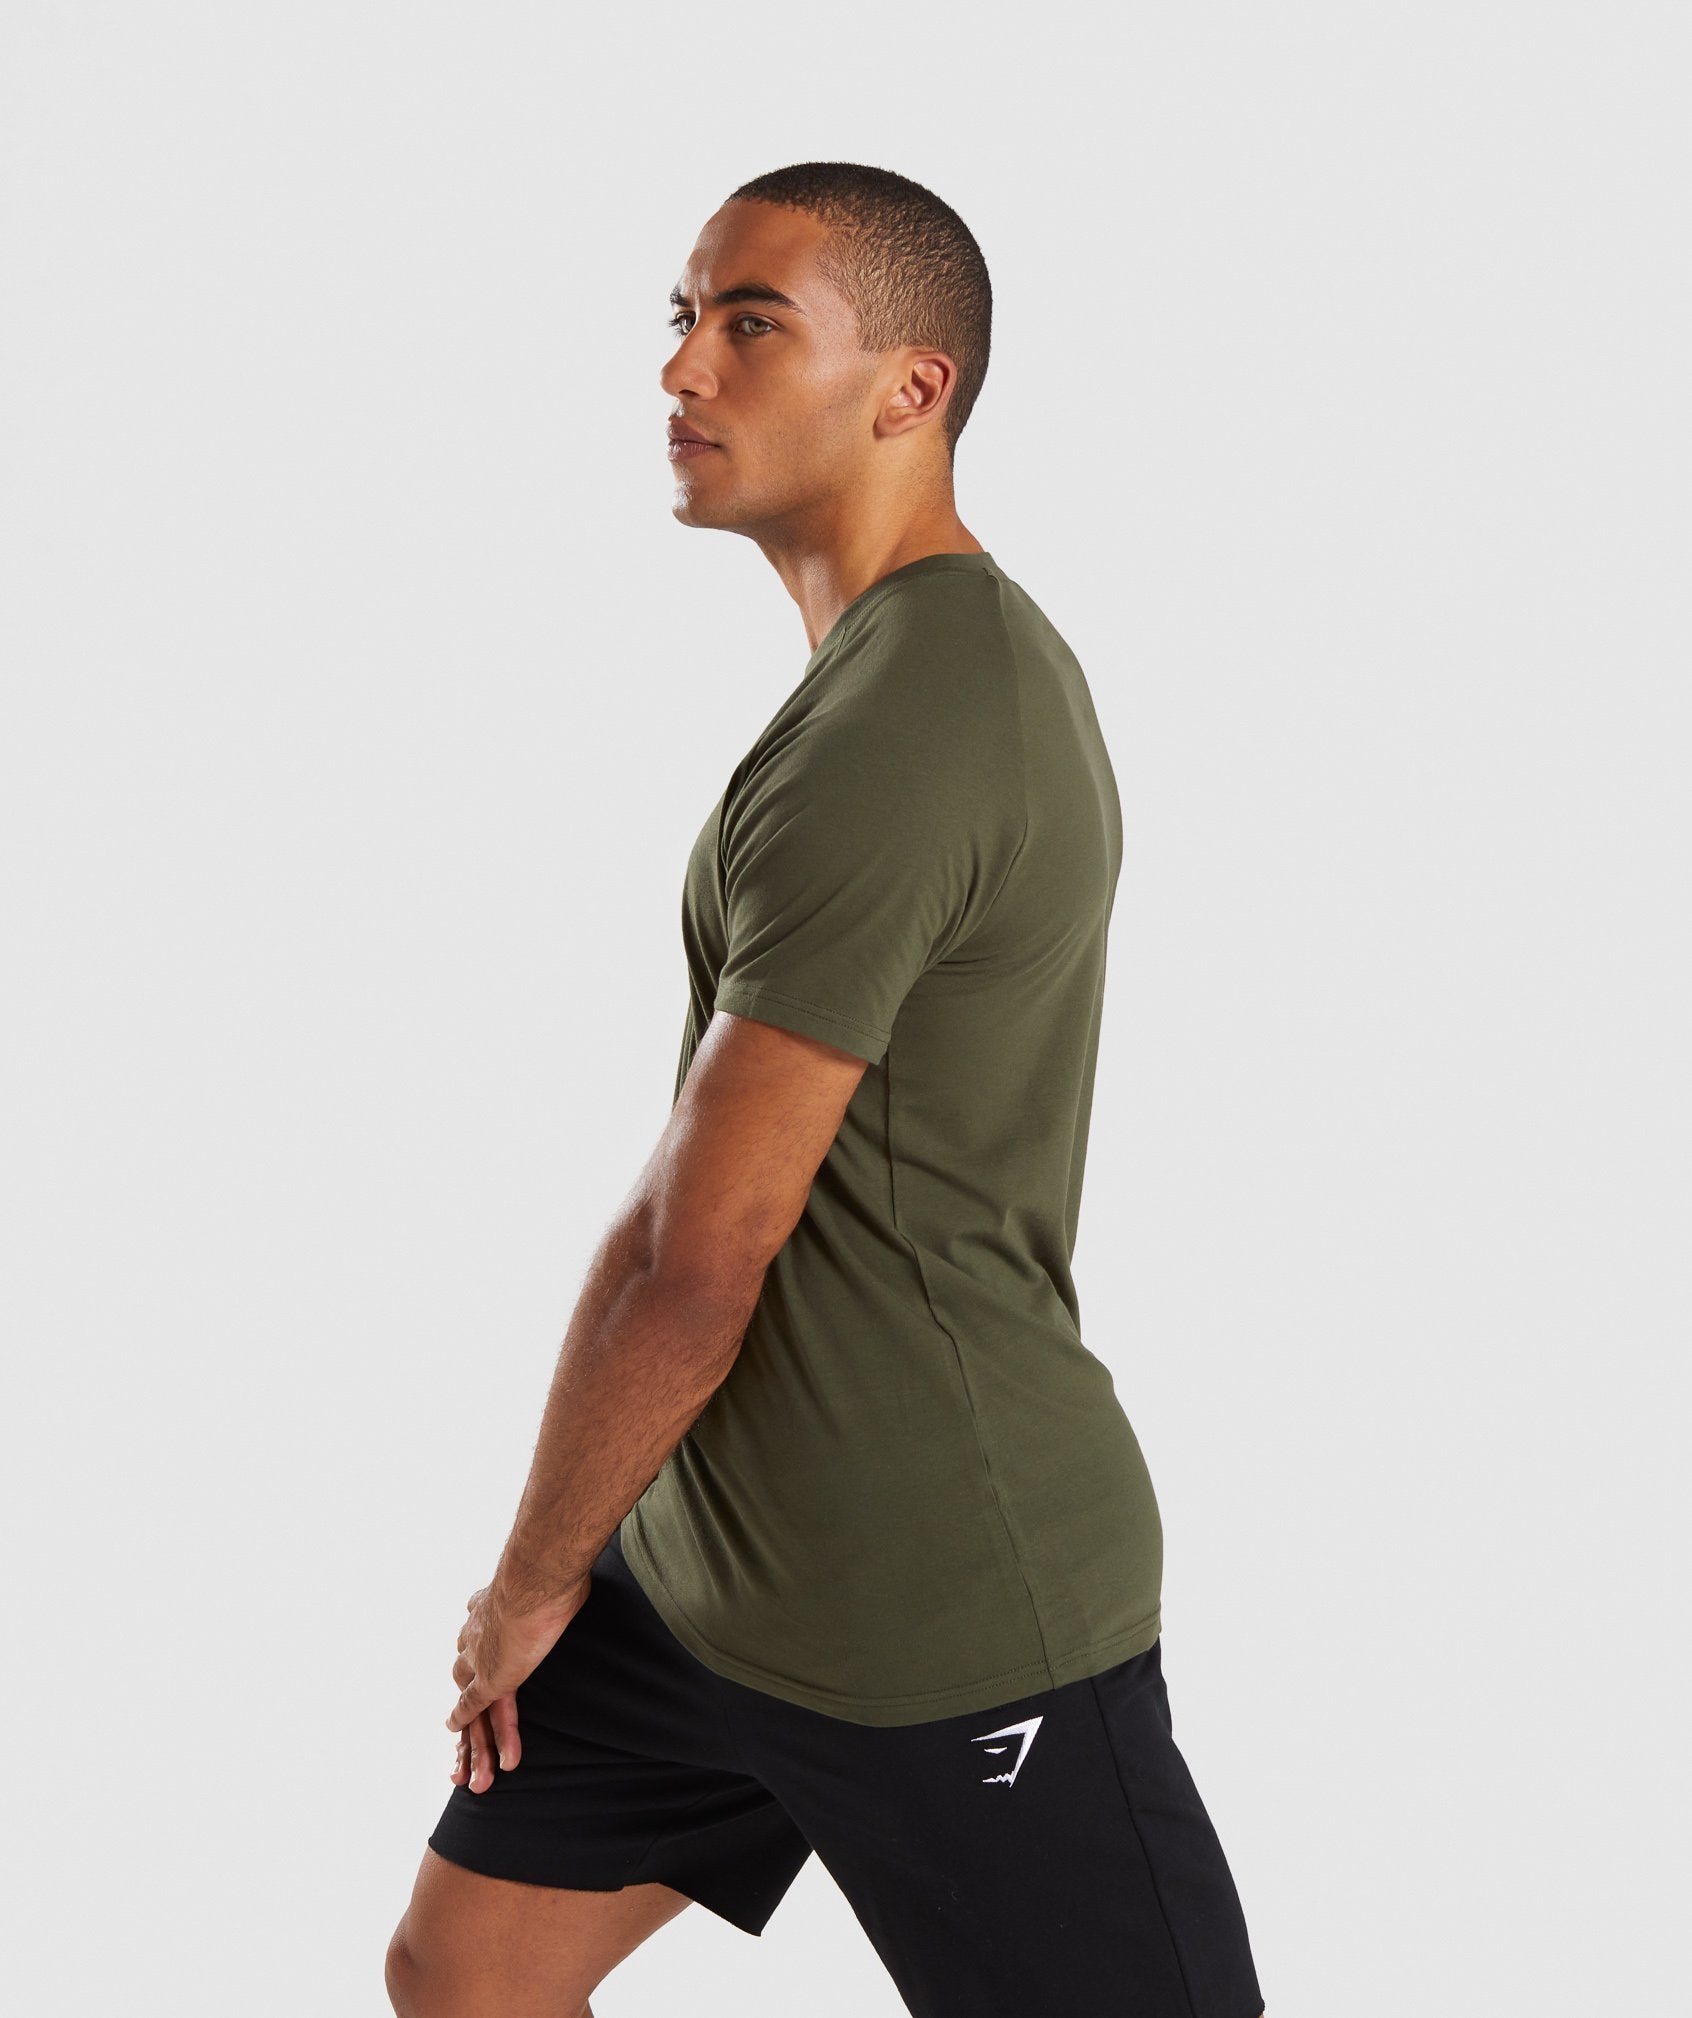 Apollo T-Shirt in Woodland Green - view 3